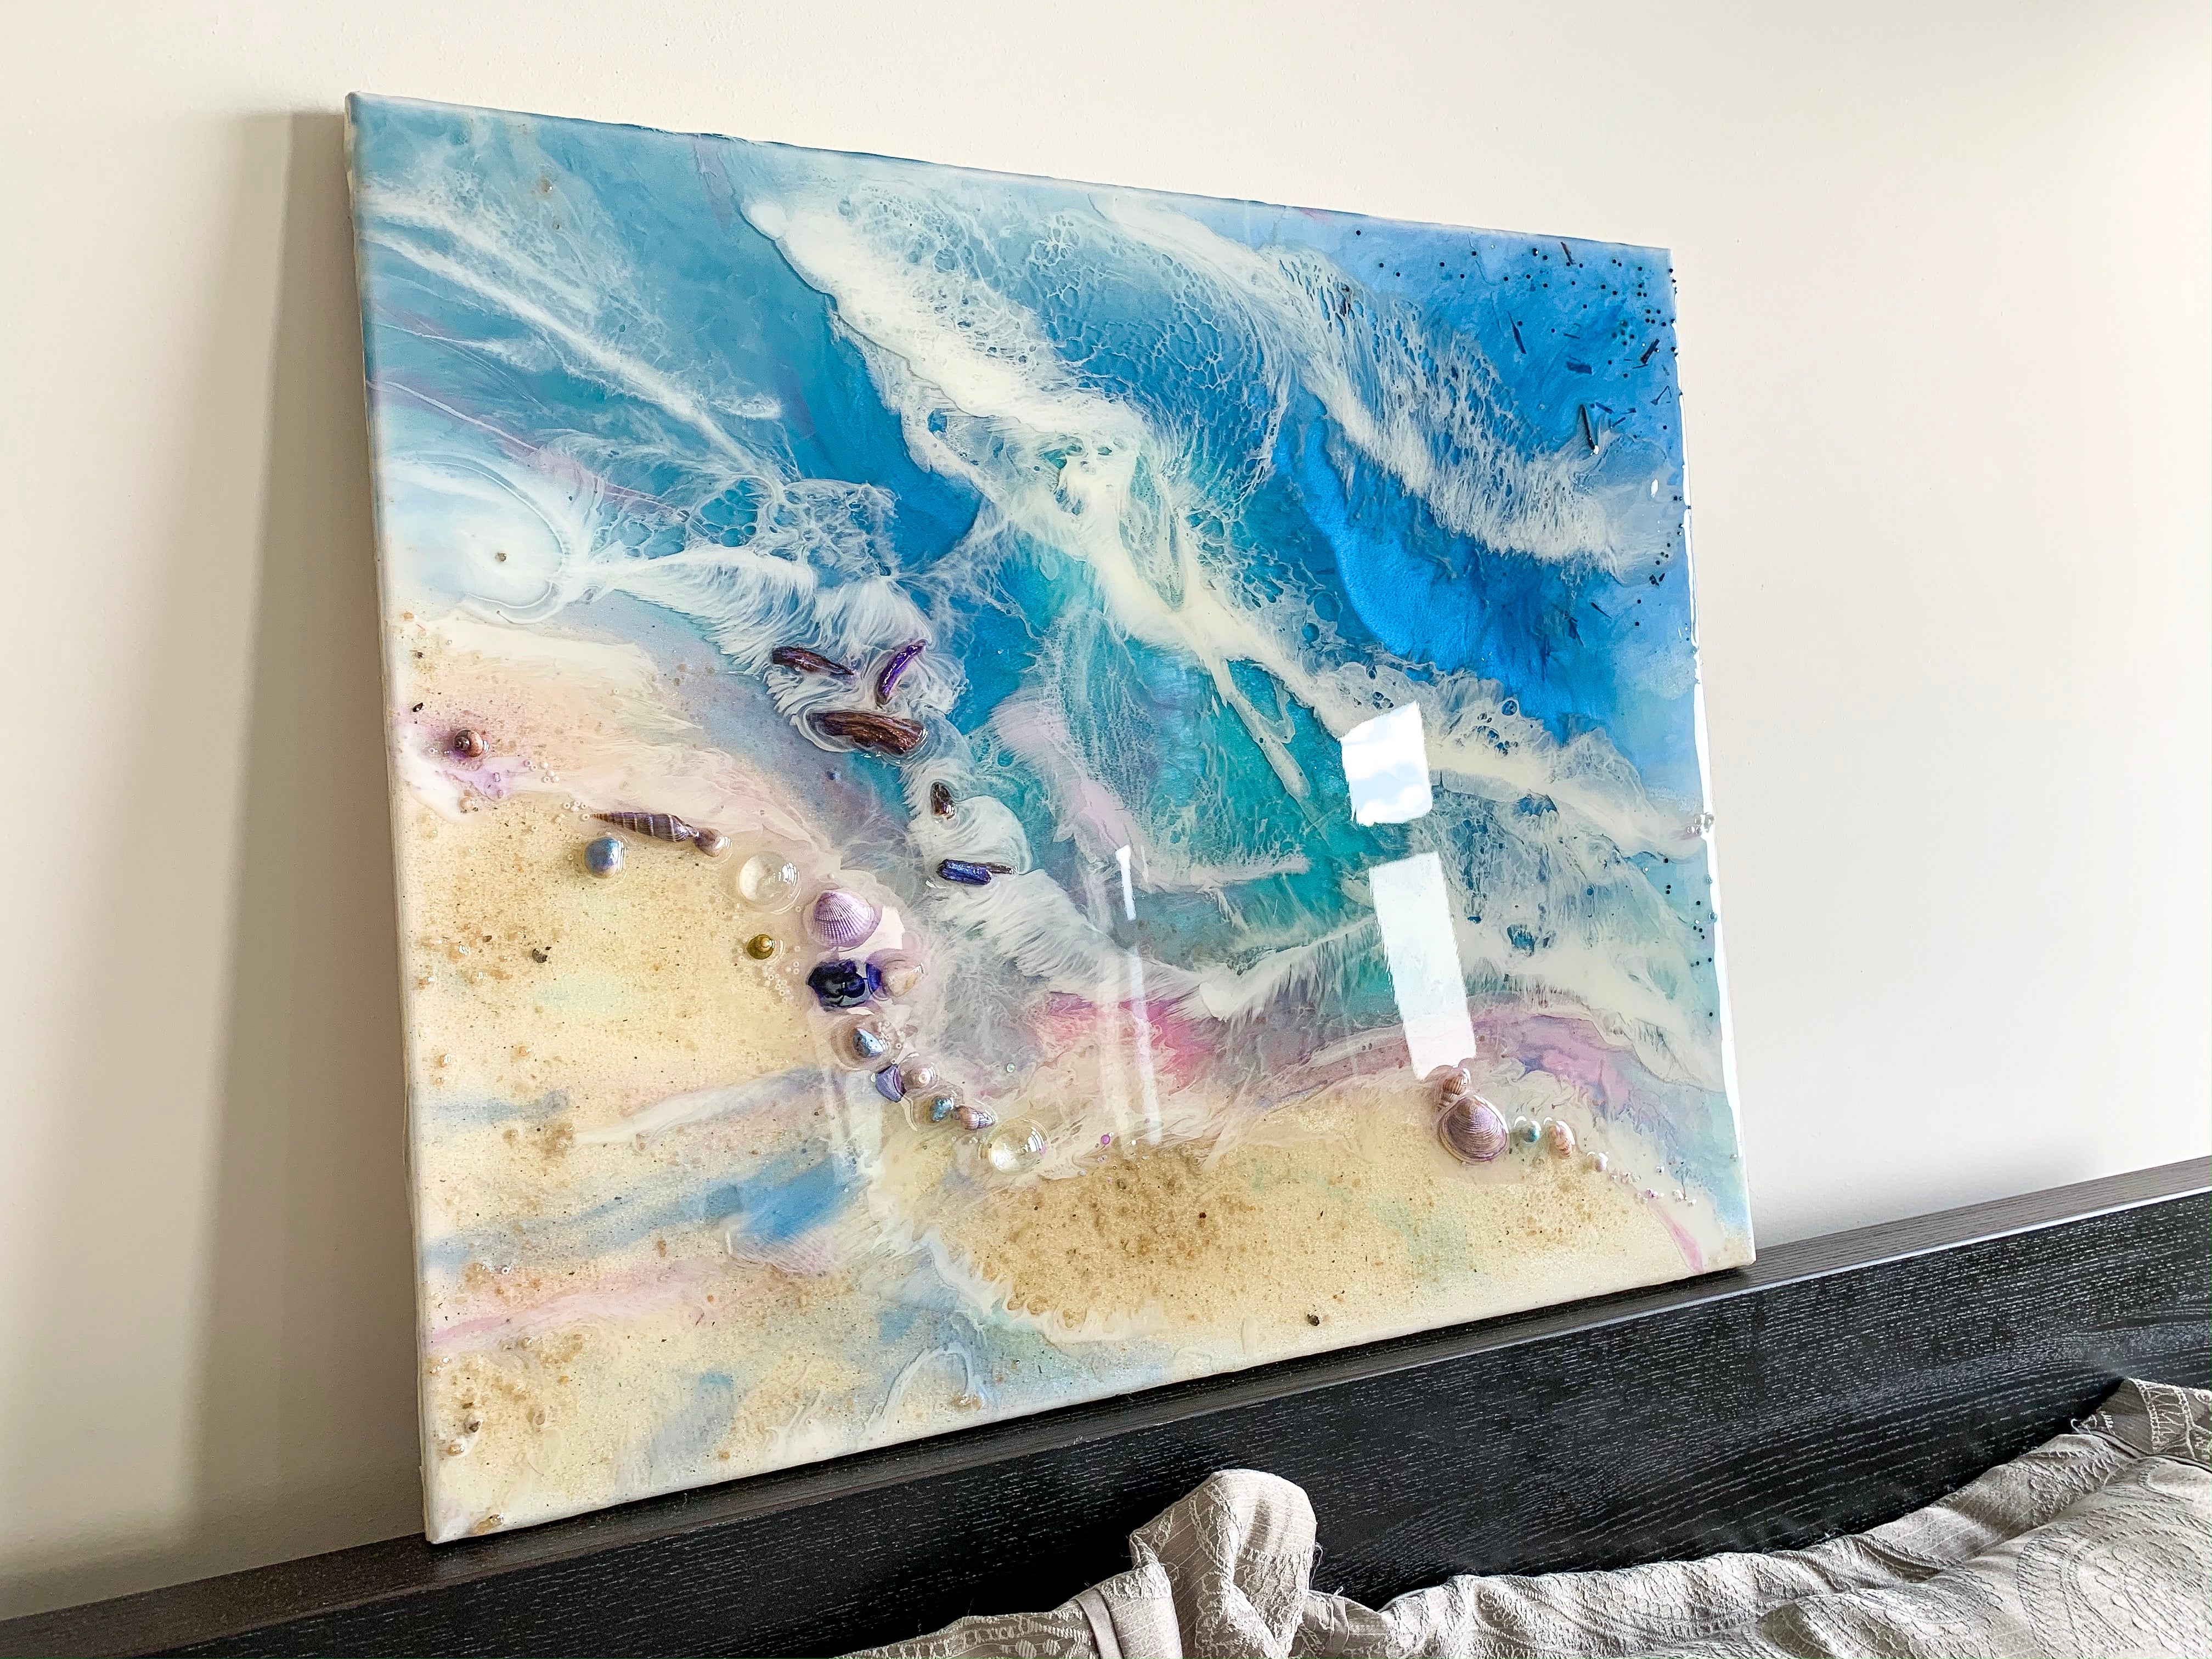 Abstract Seascape Ocean Painting With Teal Colours - Julia Resin Art